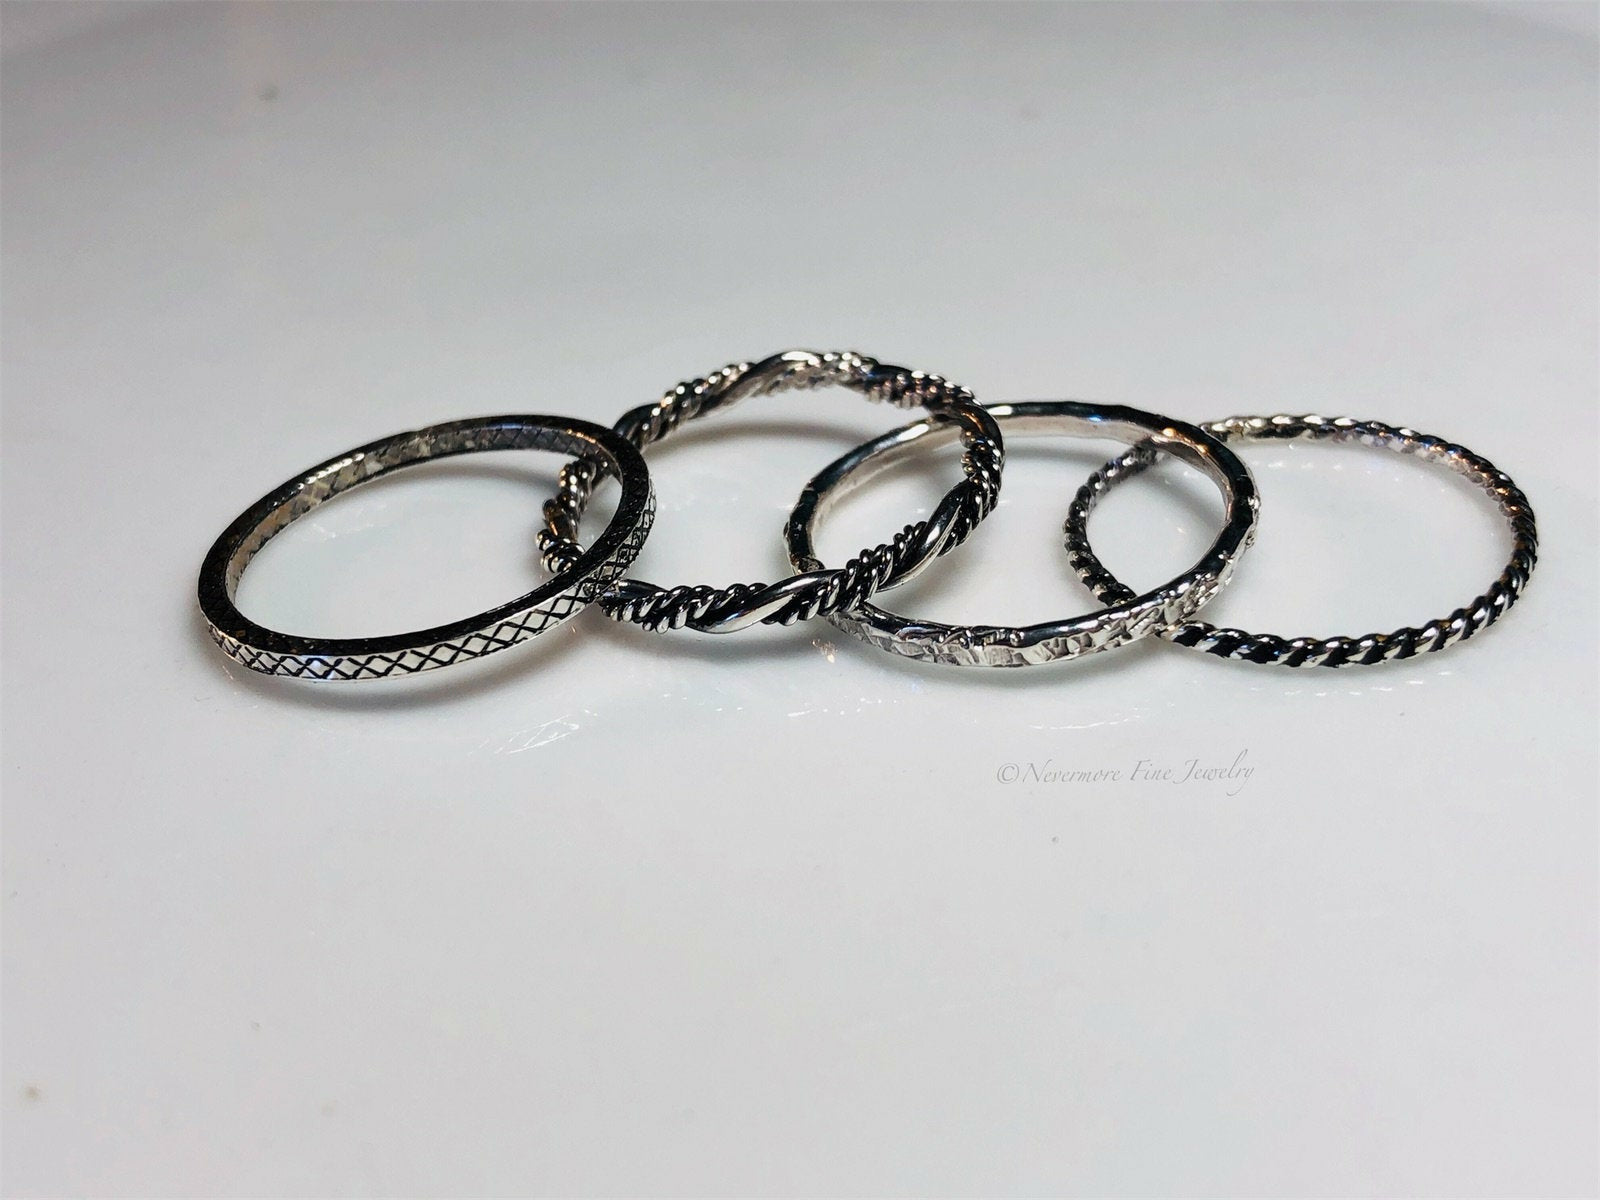 stackable-rings-sterling-silver-sterling-silver-rings-mixed-texture-rings-stackable-simple-bands-gifts-for-her-bridesmaid-gift-graduation